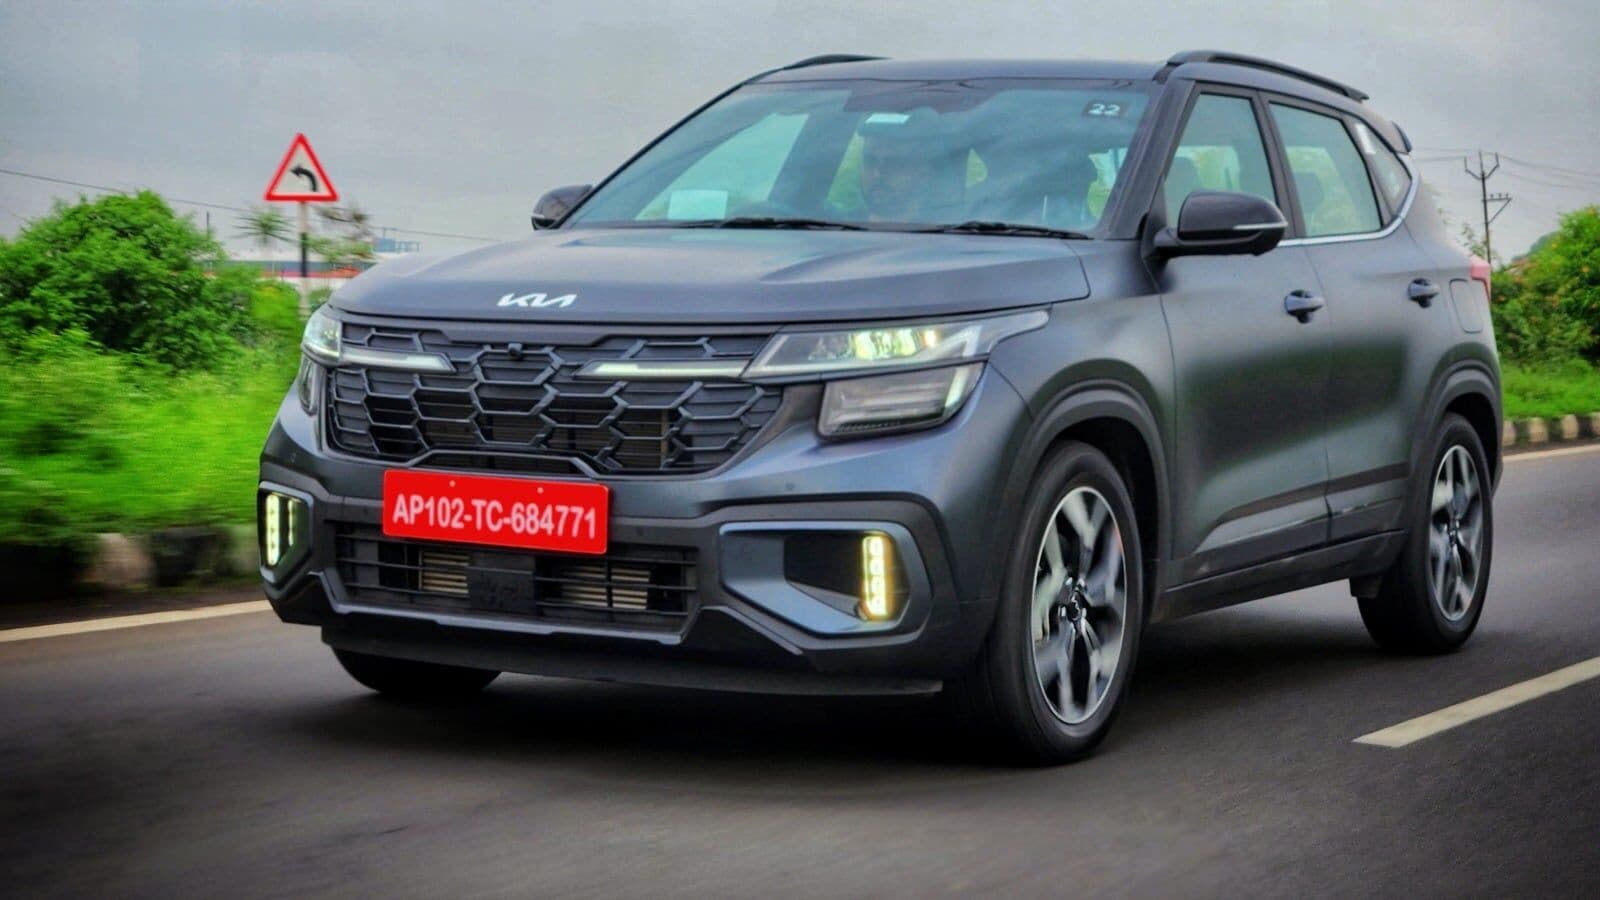 Kia Seltos SUV prices hiked. Check how much you need to pay now